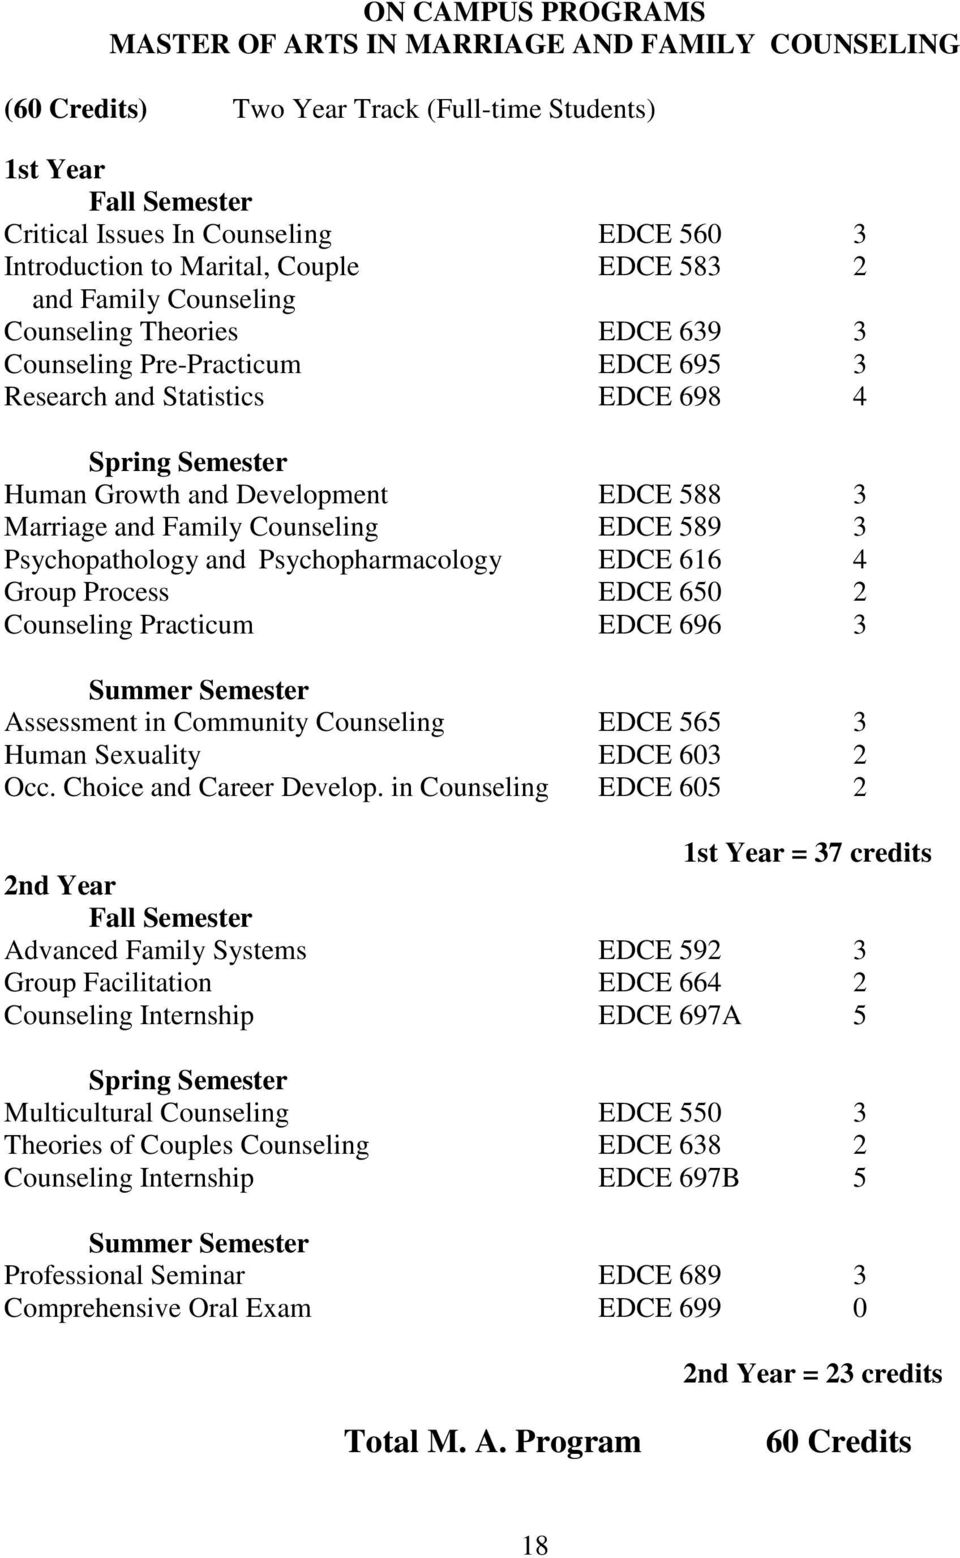 EDCE 588 3 Marriage and Family Counseling EDCE 589 3 Psychopathology and Psychopharmacology EDCE 616 4 Group Process EDCE 650 2 Counseling Practicum EDCE 696 3 Summer Semester Assessment in Community